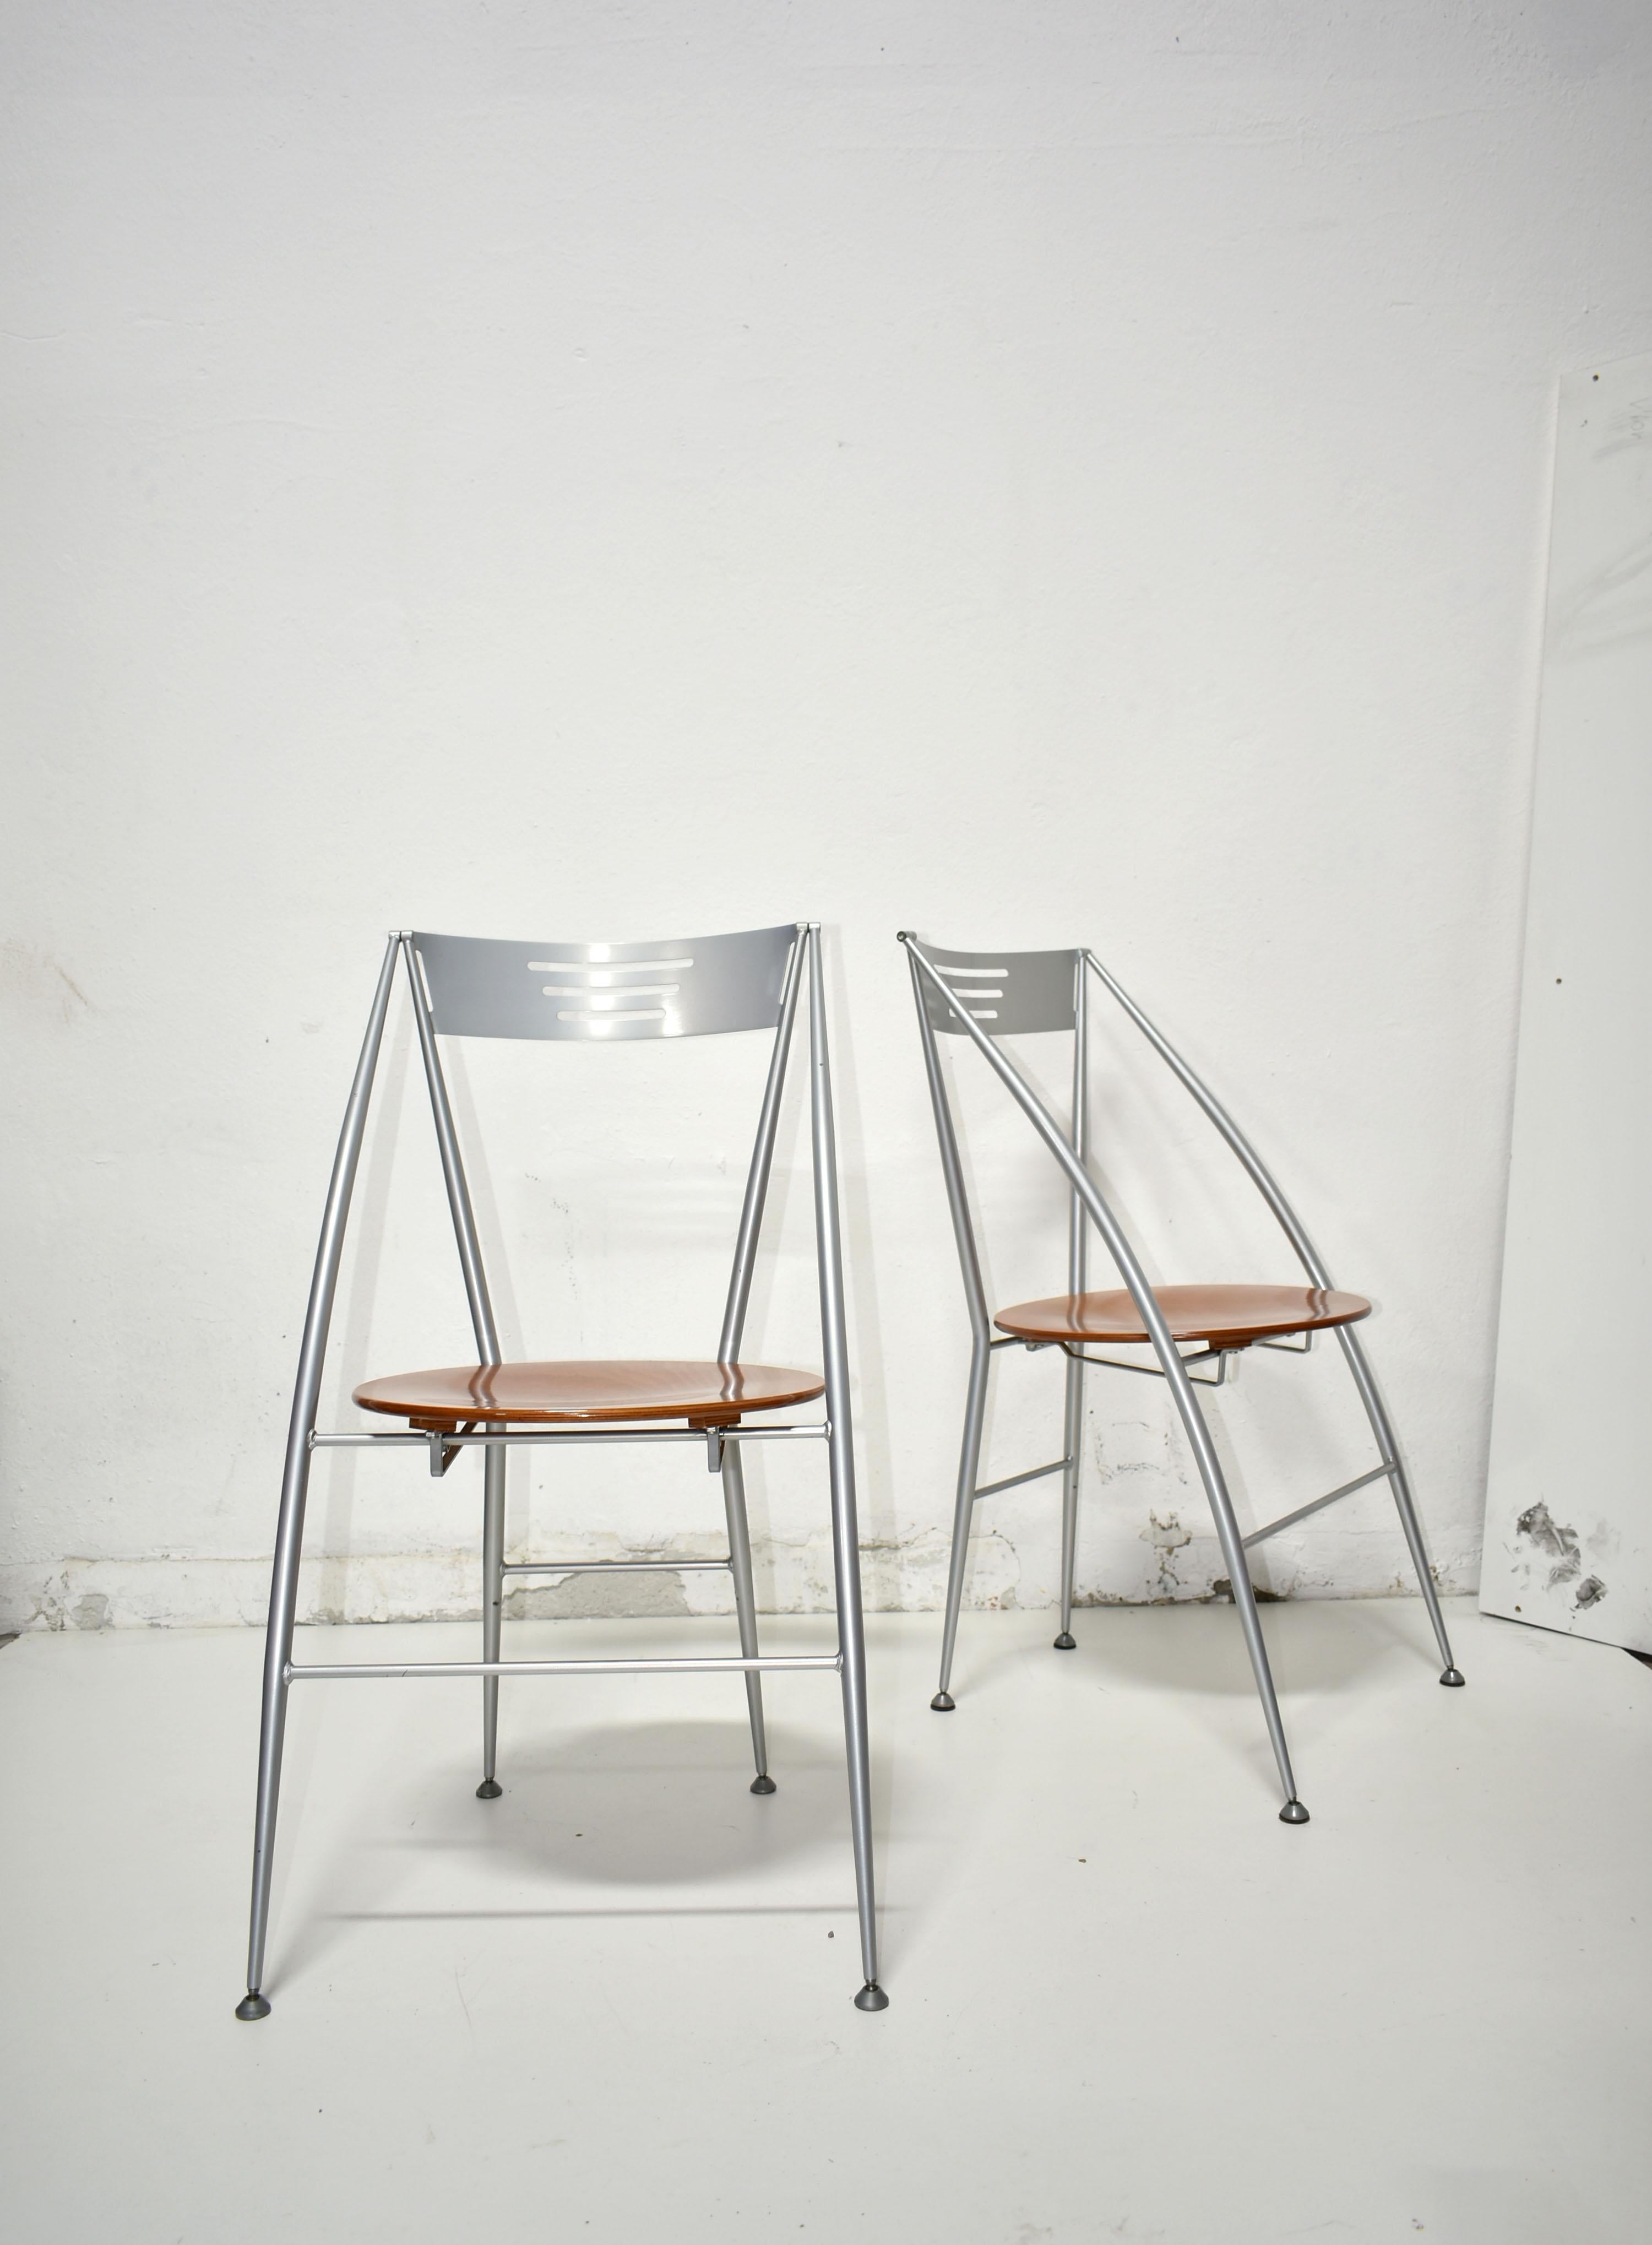 Set of 4 Folding Dining Chairs, Italy 1980s, Postmodern Design 1